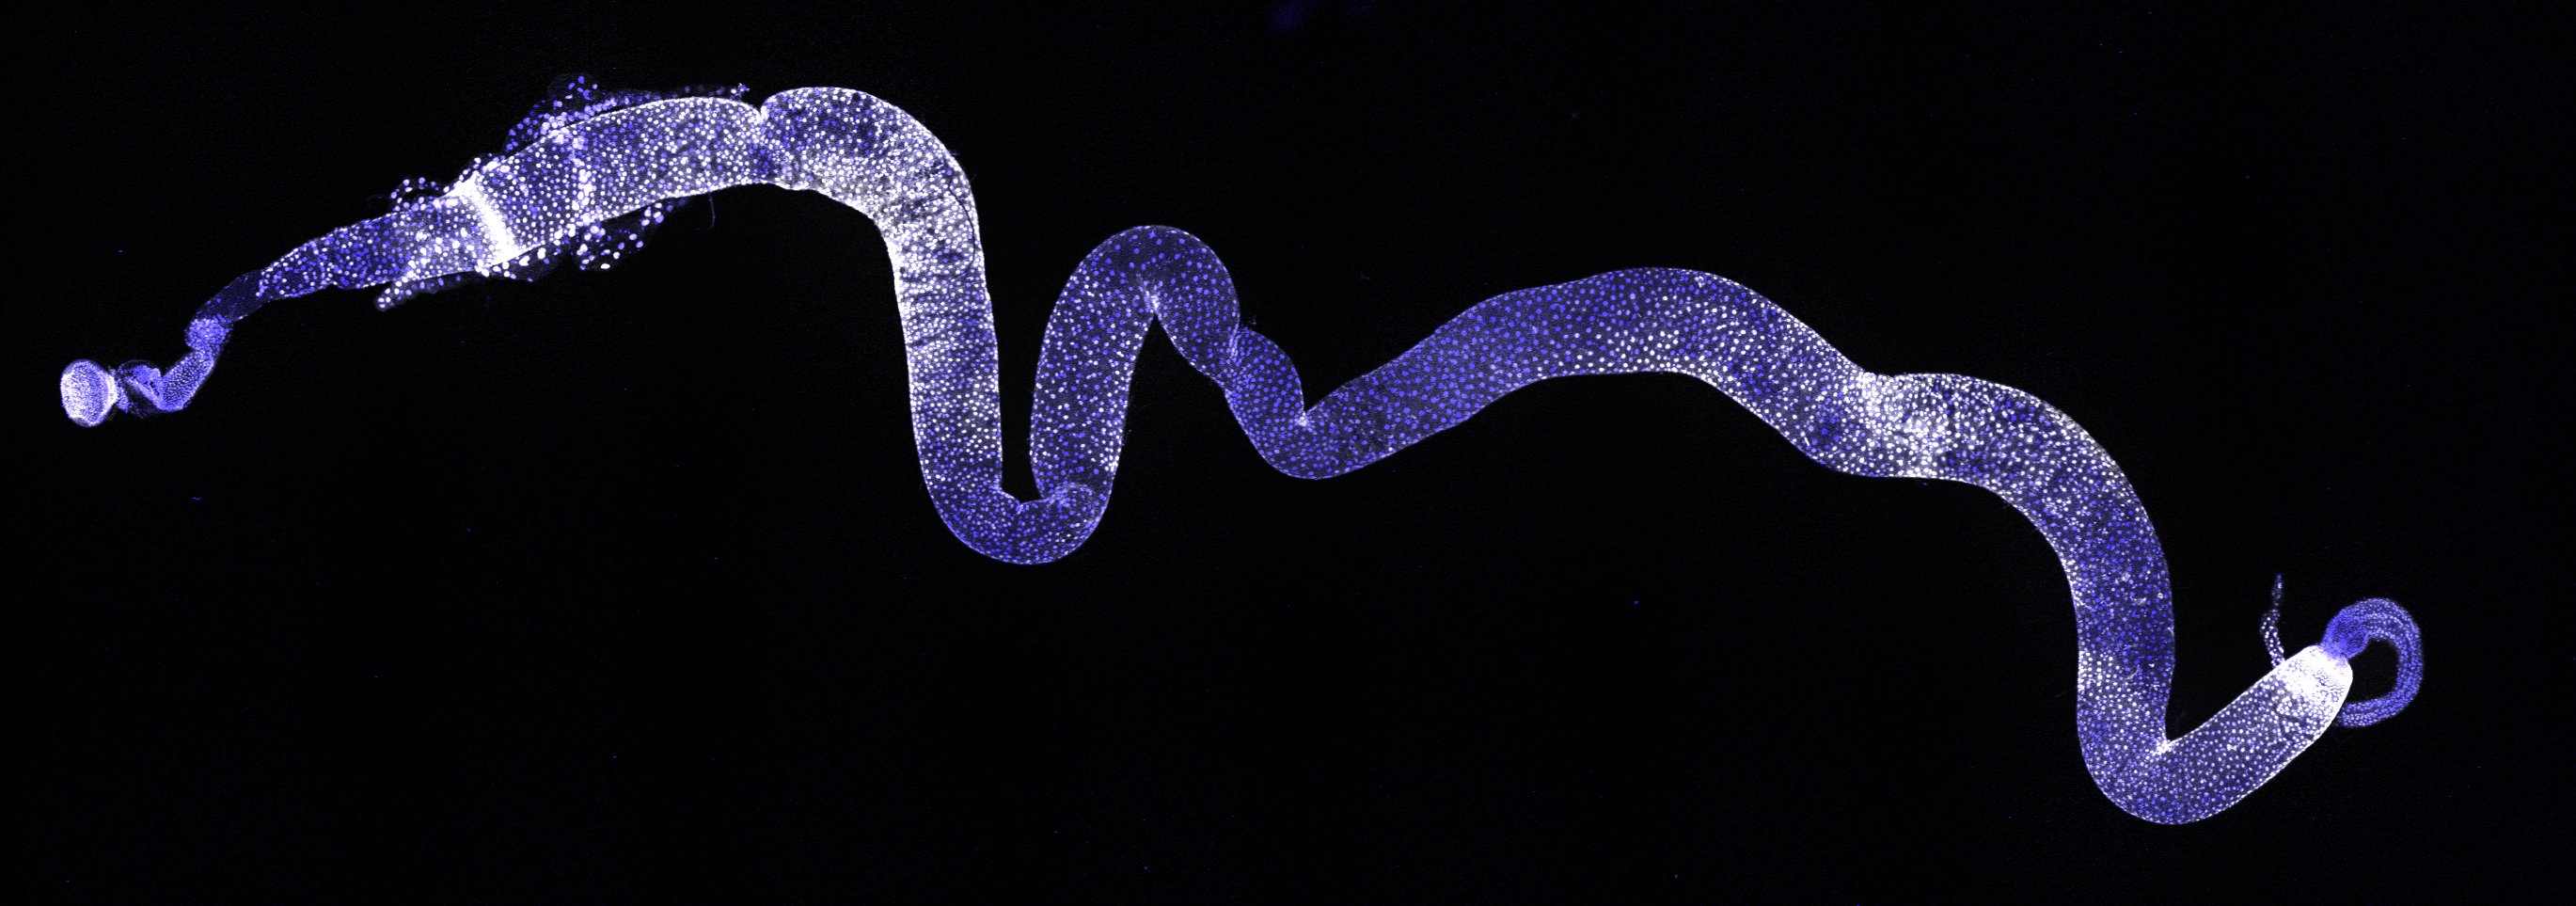 Image of a drosophila gut, a long winding squiggle made up of blue and white dots. 